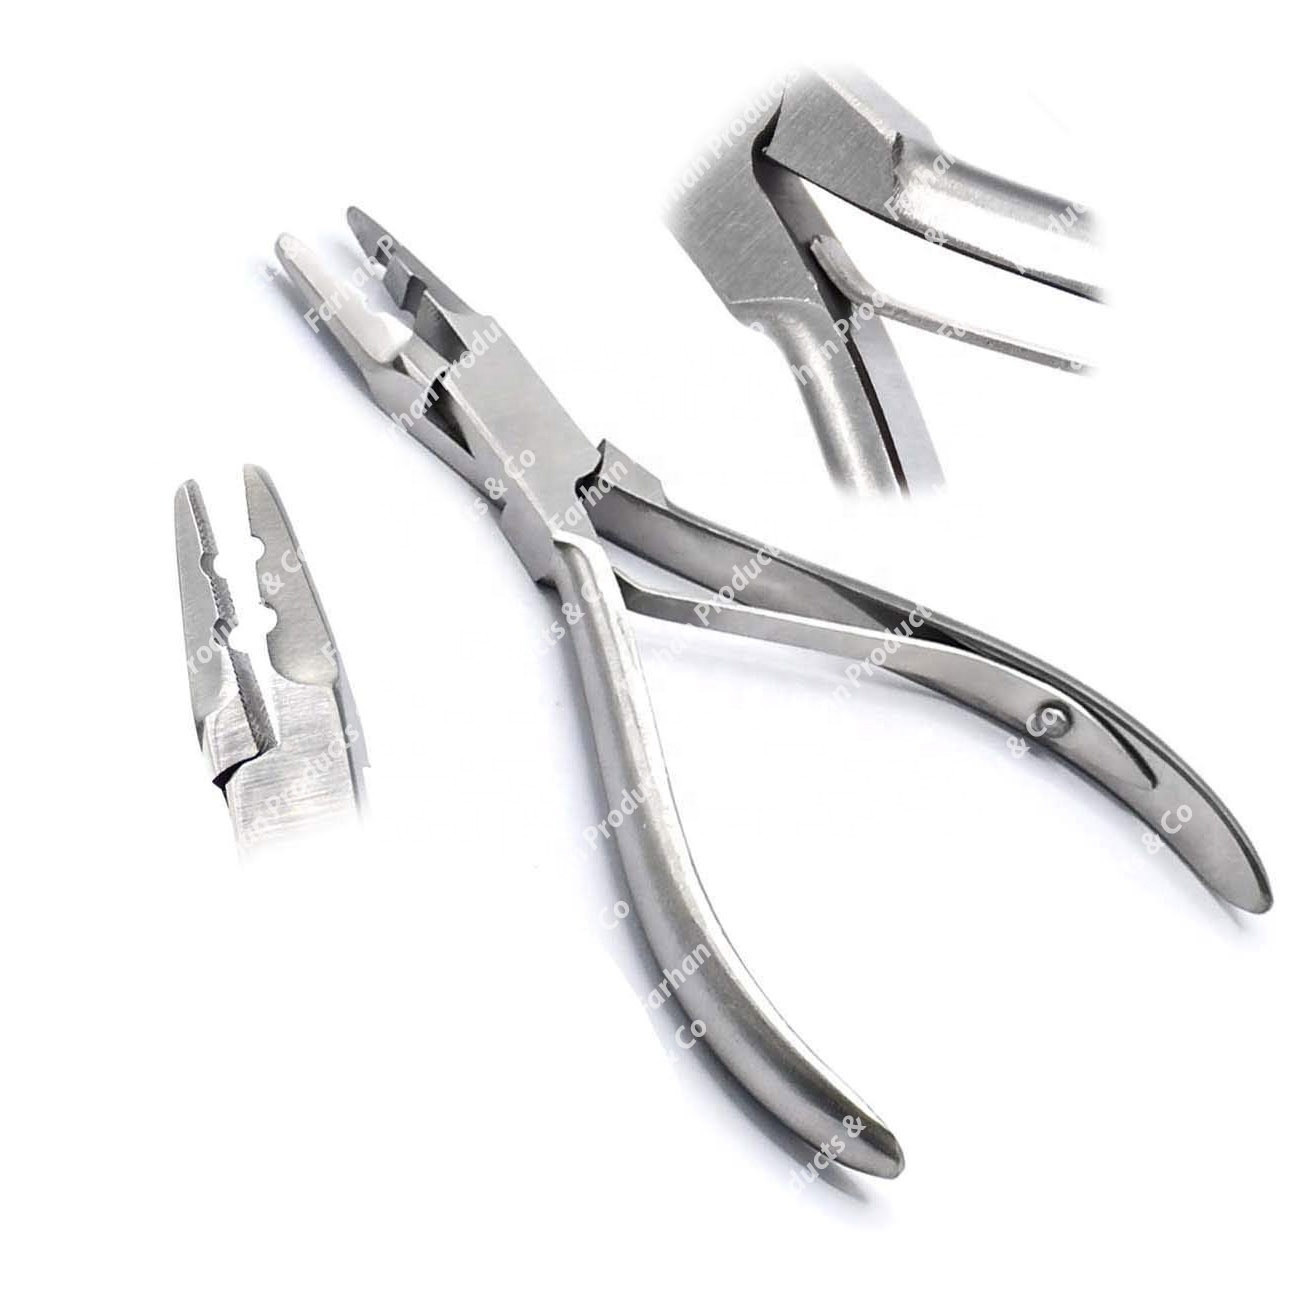 2 Holes Mini Plier For Micro Nano Ring Hair Extensions opener and Removal Tool